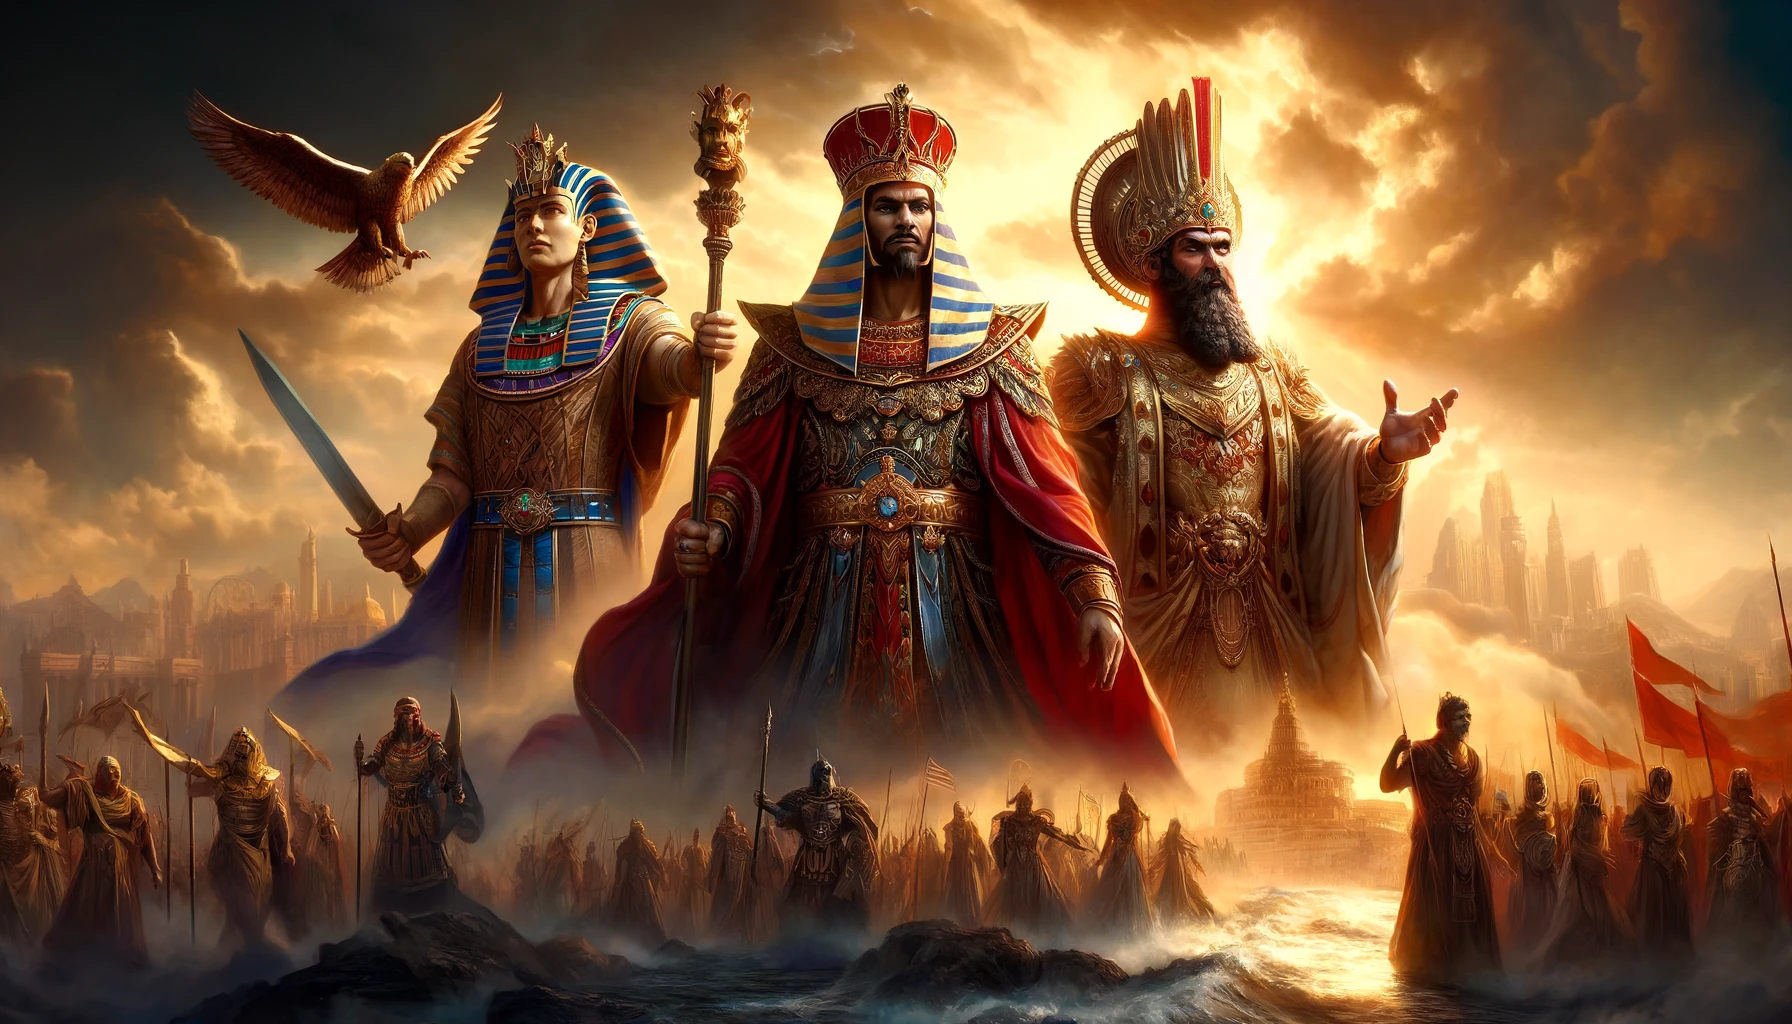 What do an Egyptian Pharaoh, a Babylonian king, and a Persian emperor have in common? How did these powerful rulers play crucial roles in the fulfillment of God's divine plans? Explore how their stories reveal God's sovereignty and the unfolding of His divine will.